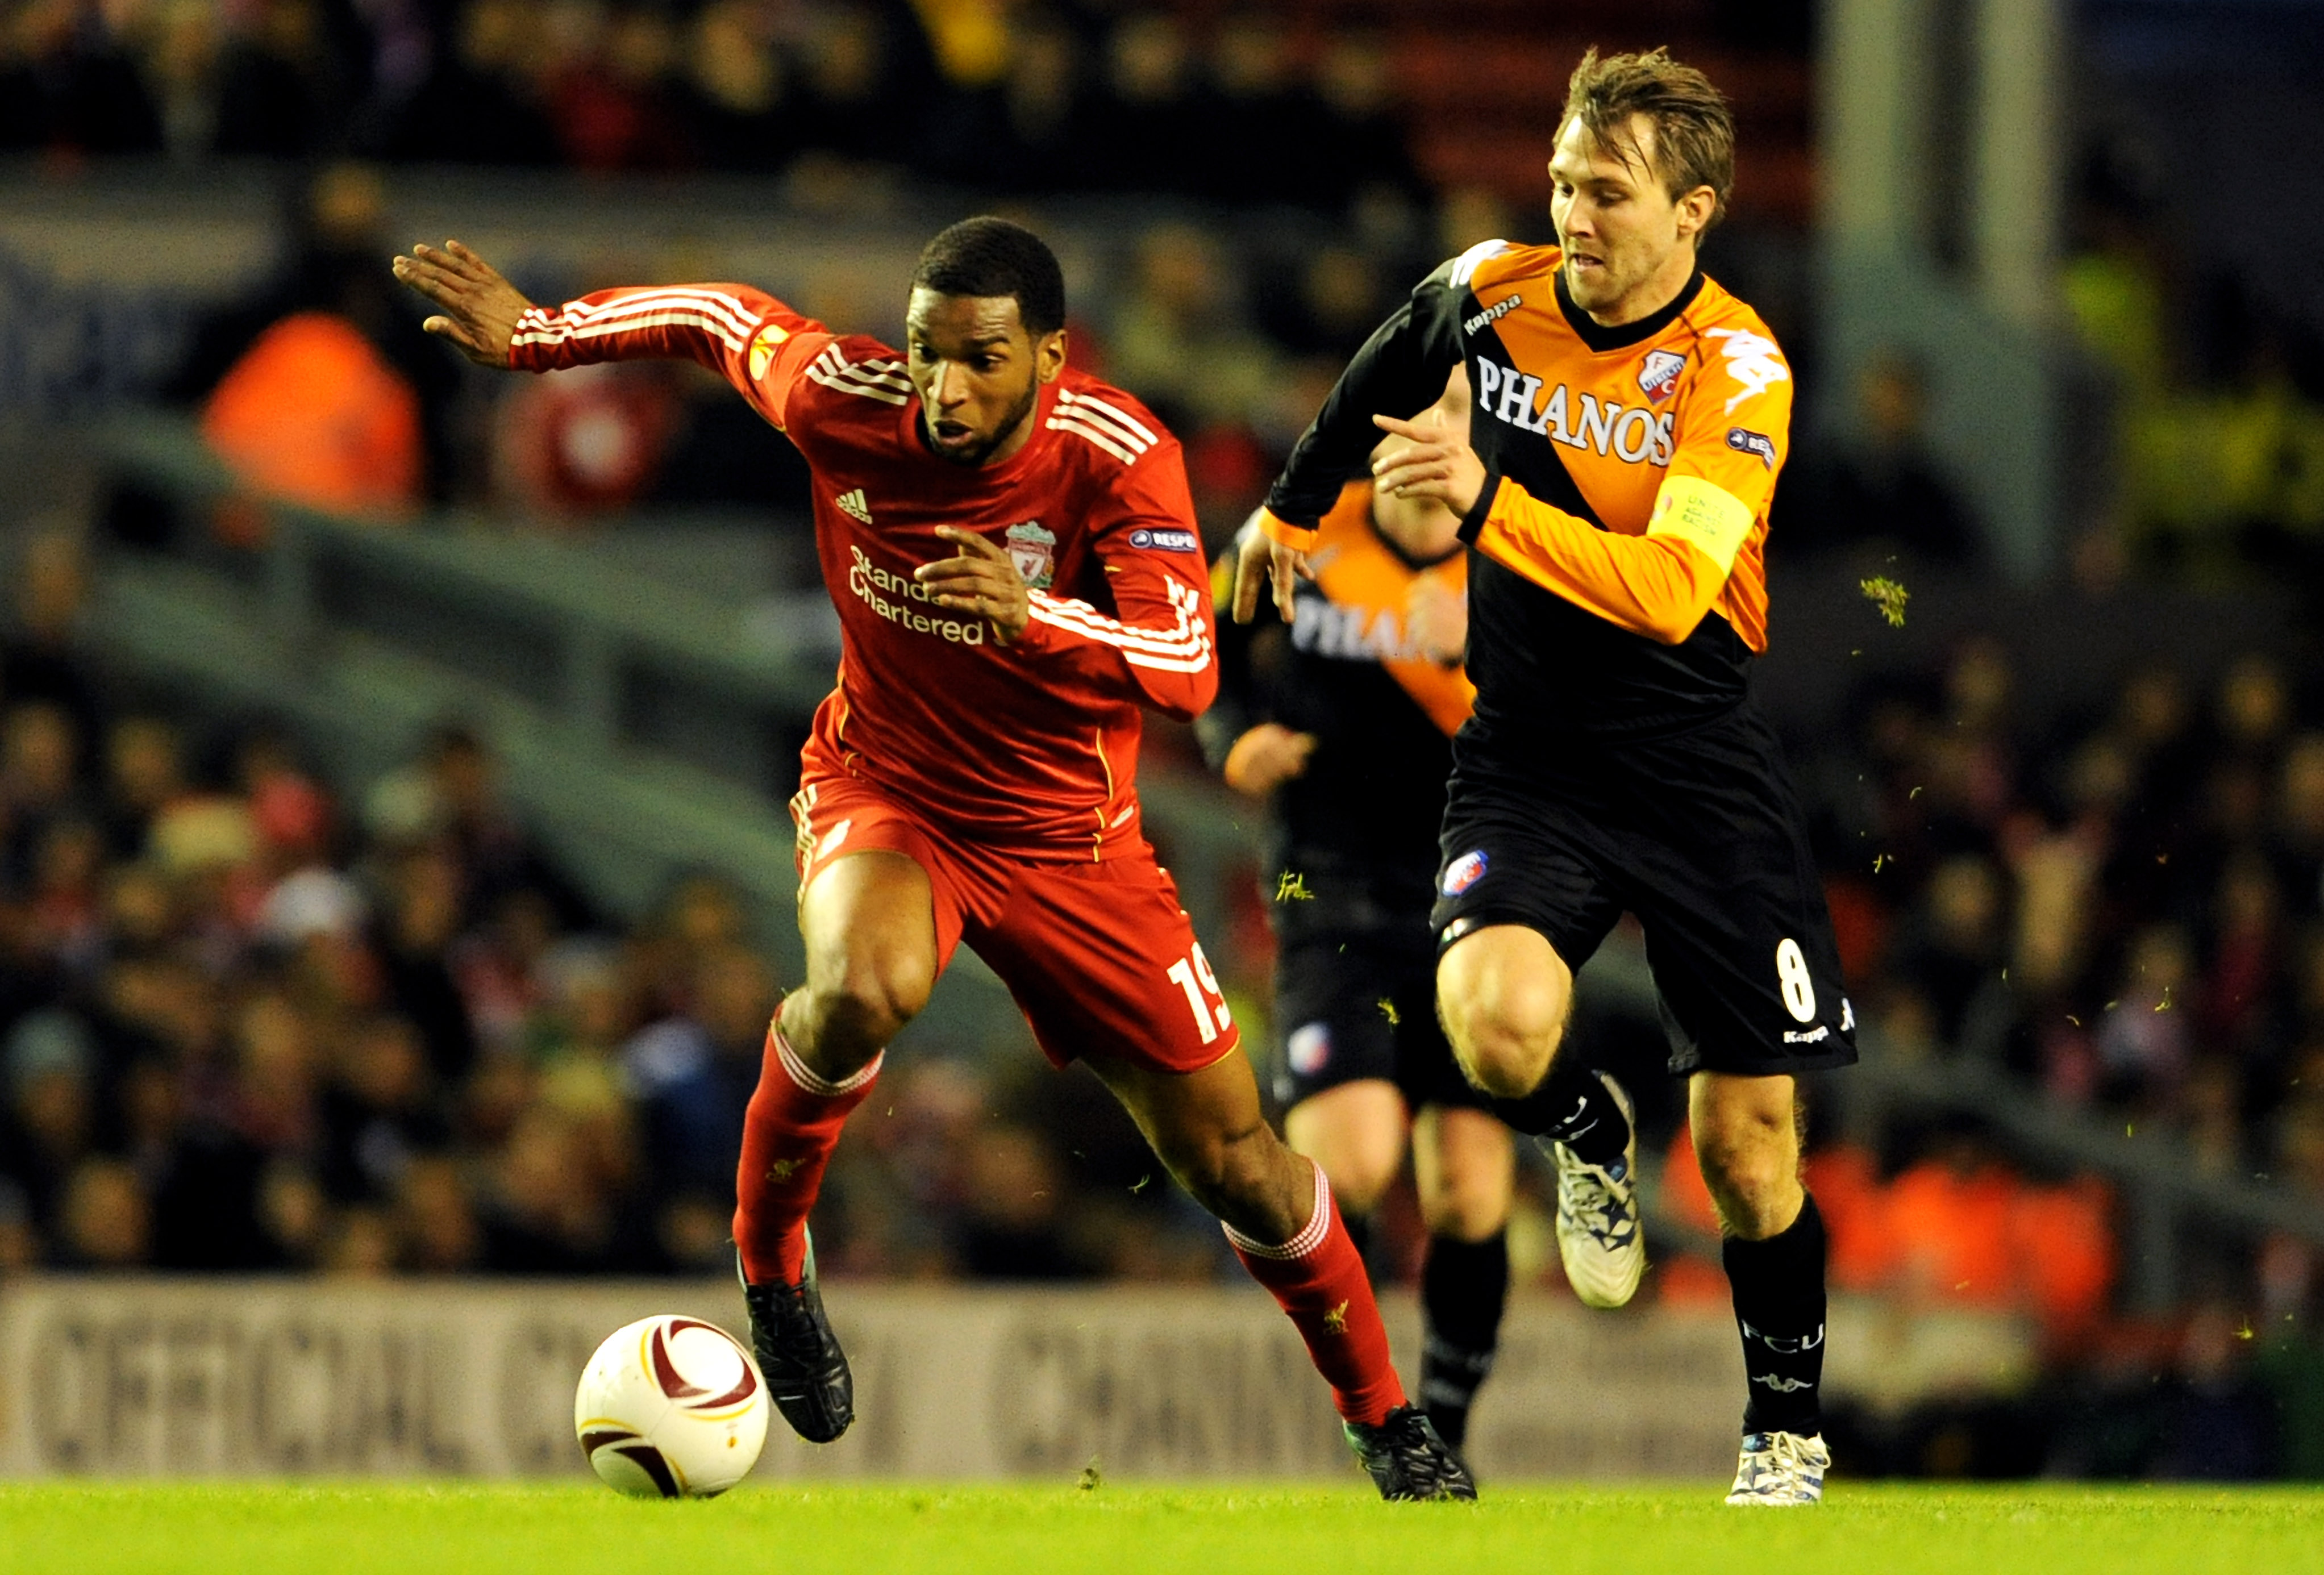 LIVERPOOL, ENGLAND - DECEMBER 15:  Ryan Babel of Liverpool is pursued by Michael Silberbauer of FC Utrecht during the UEFA Europa League Group K match between Liverpool and FC Utrecht at Anfield on December 15, 2010 in Liverpool, England.  (Photo by Clint